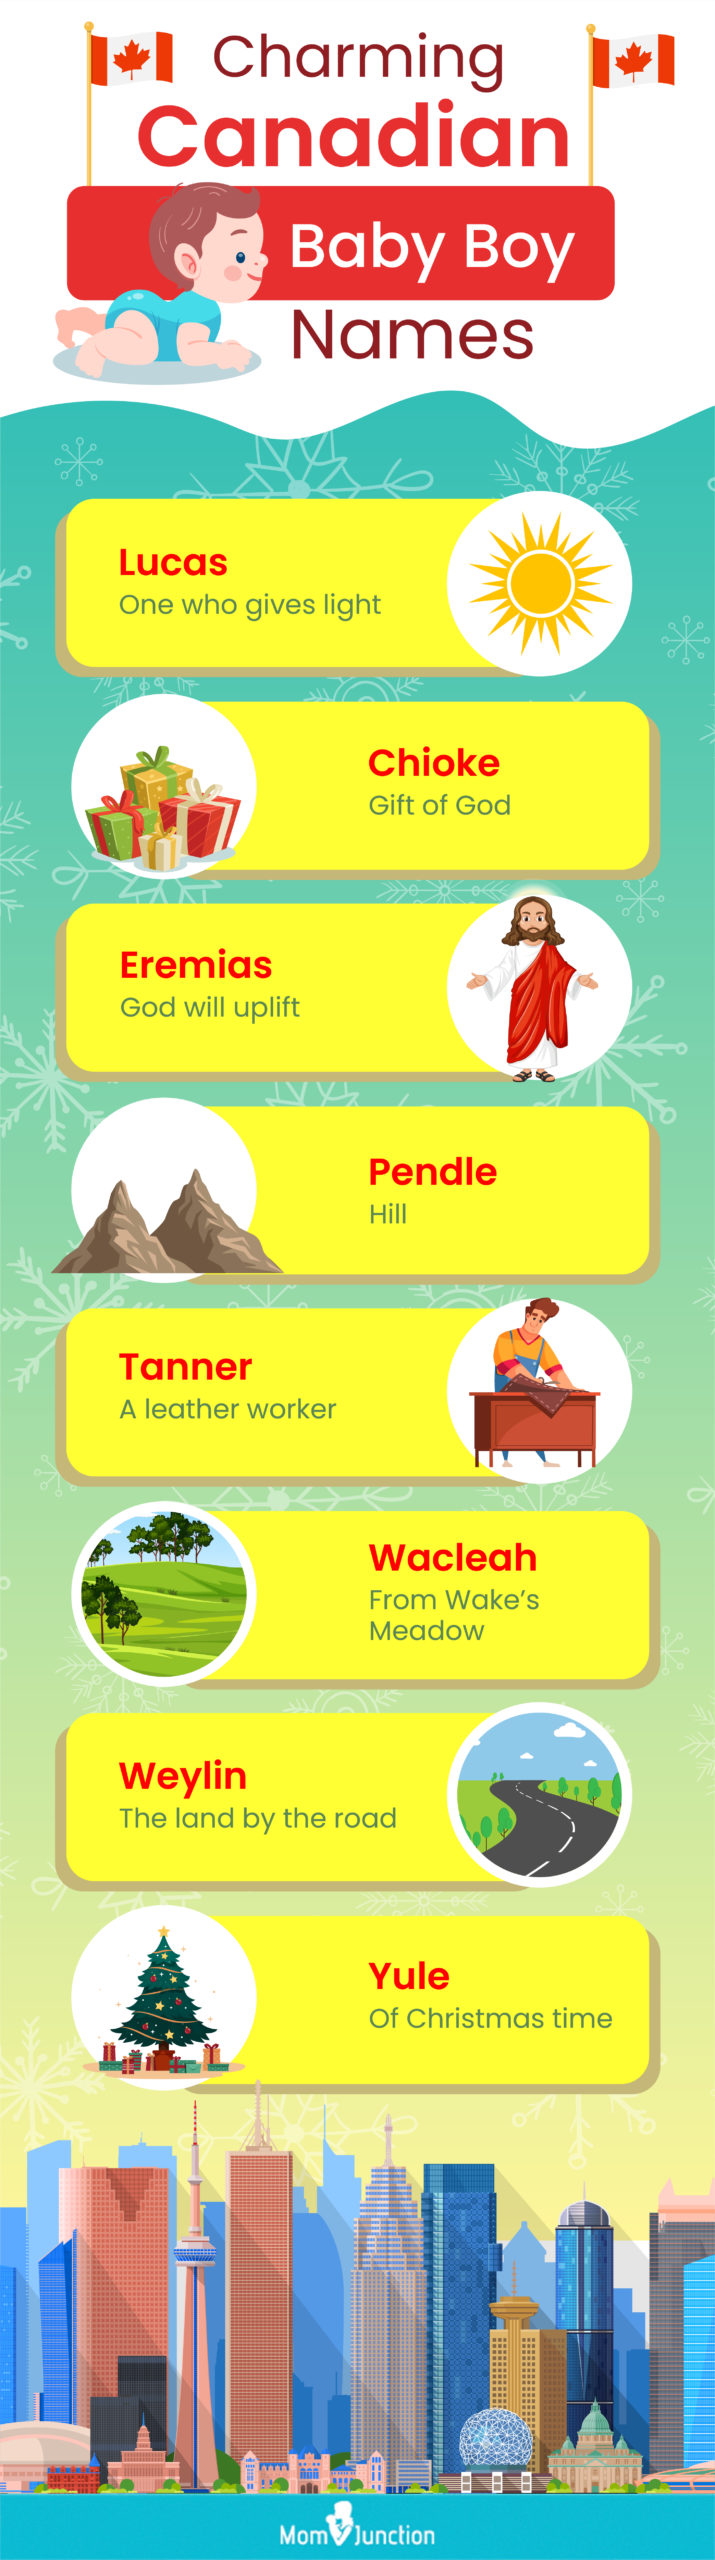 charming canadian baby boy names (infographic)